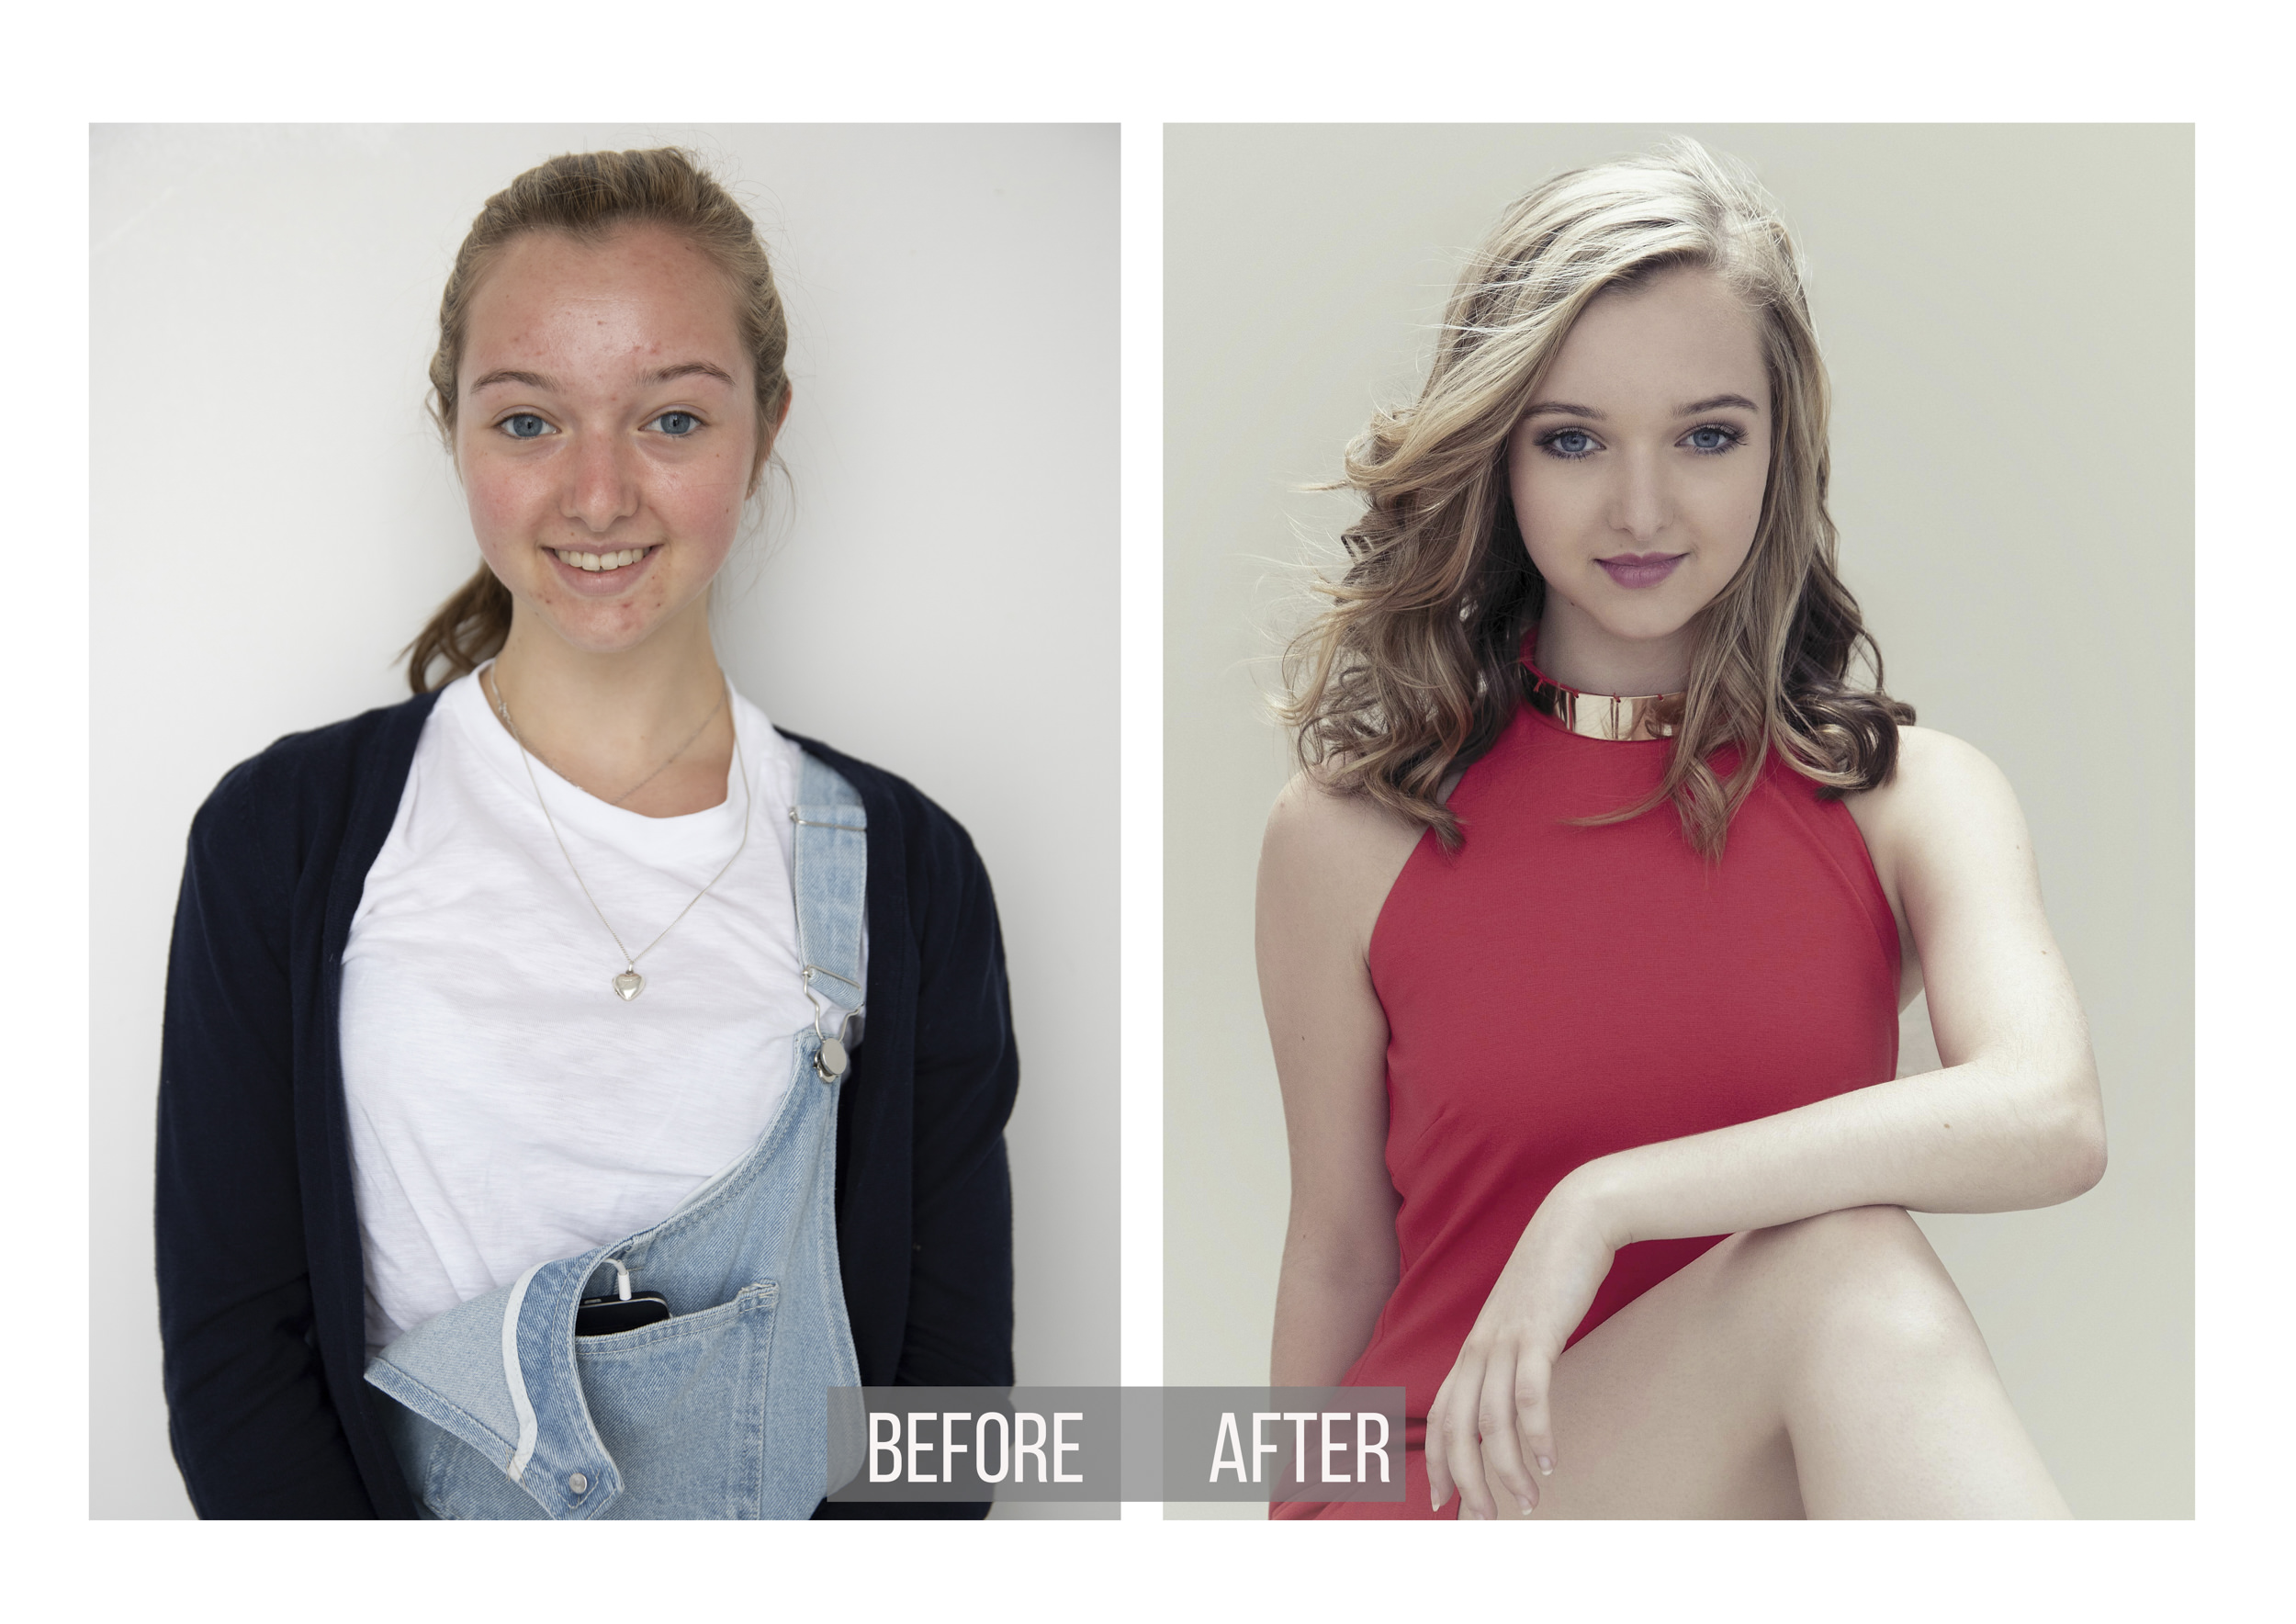 Magazine-Style-Photography-Normal-Girl-transformation into Model